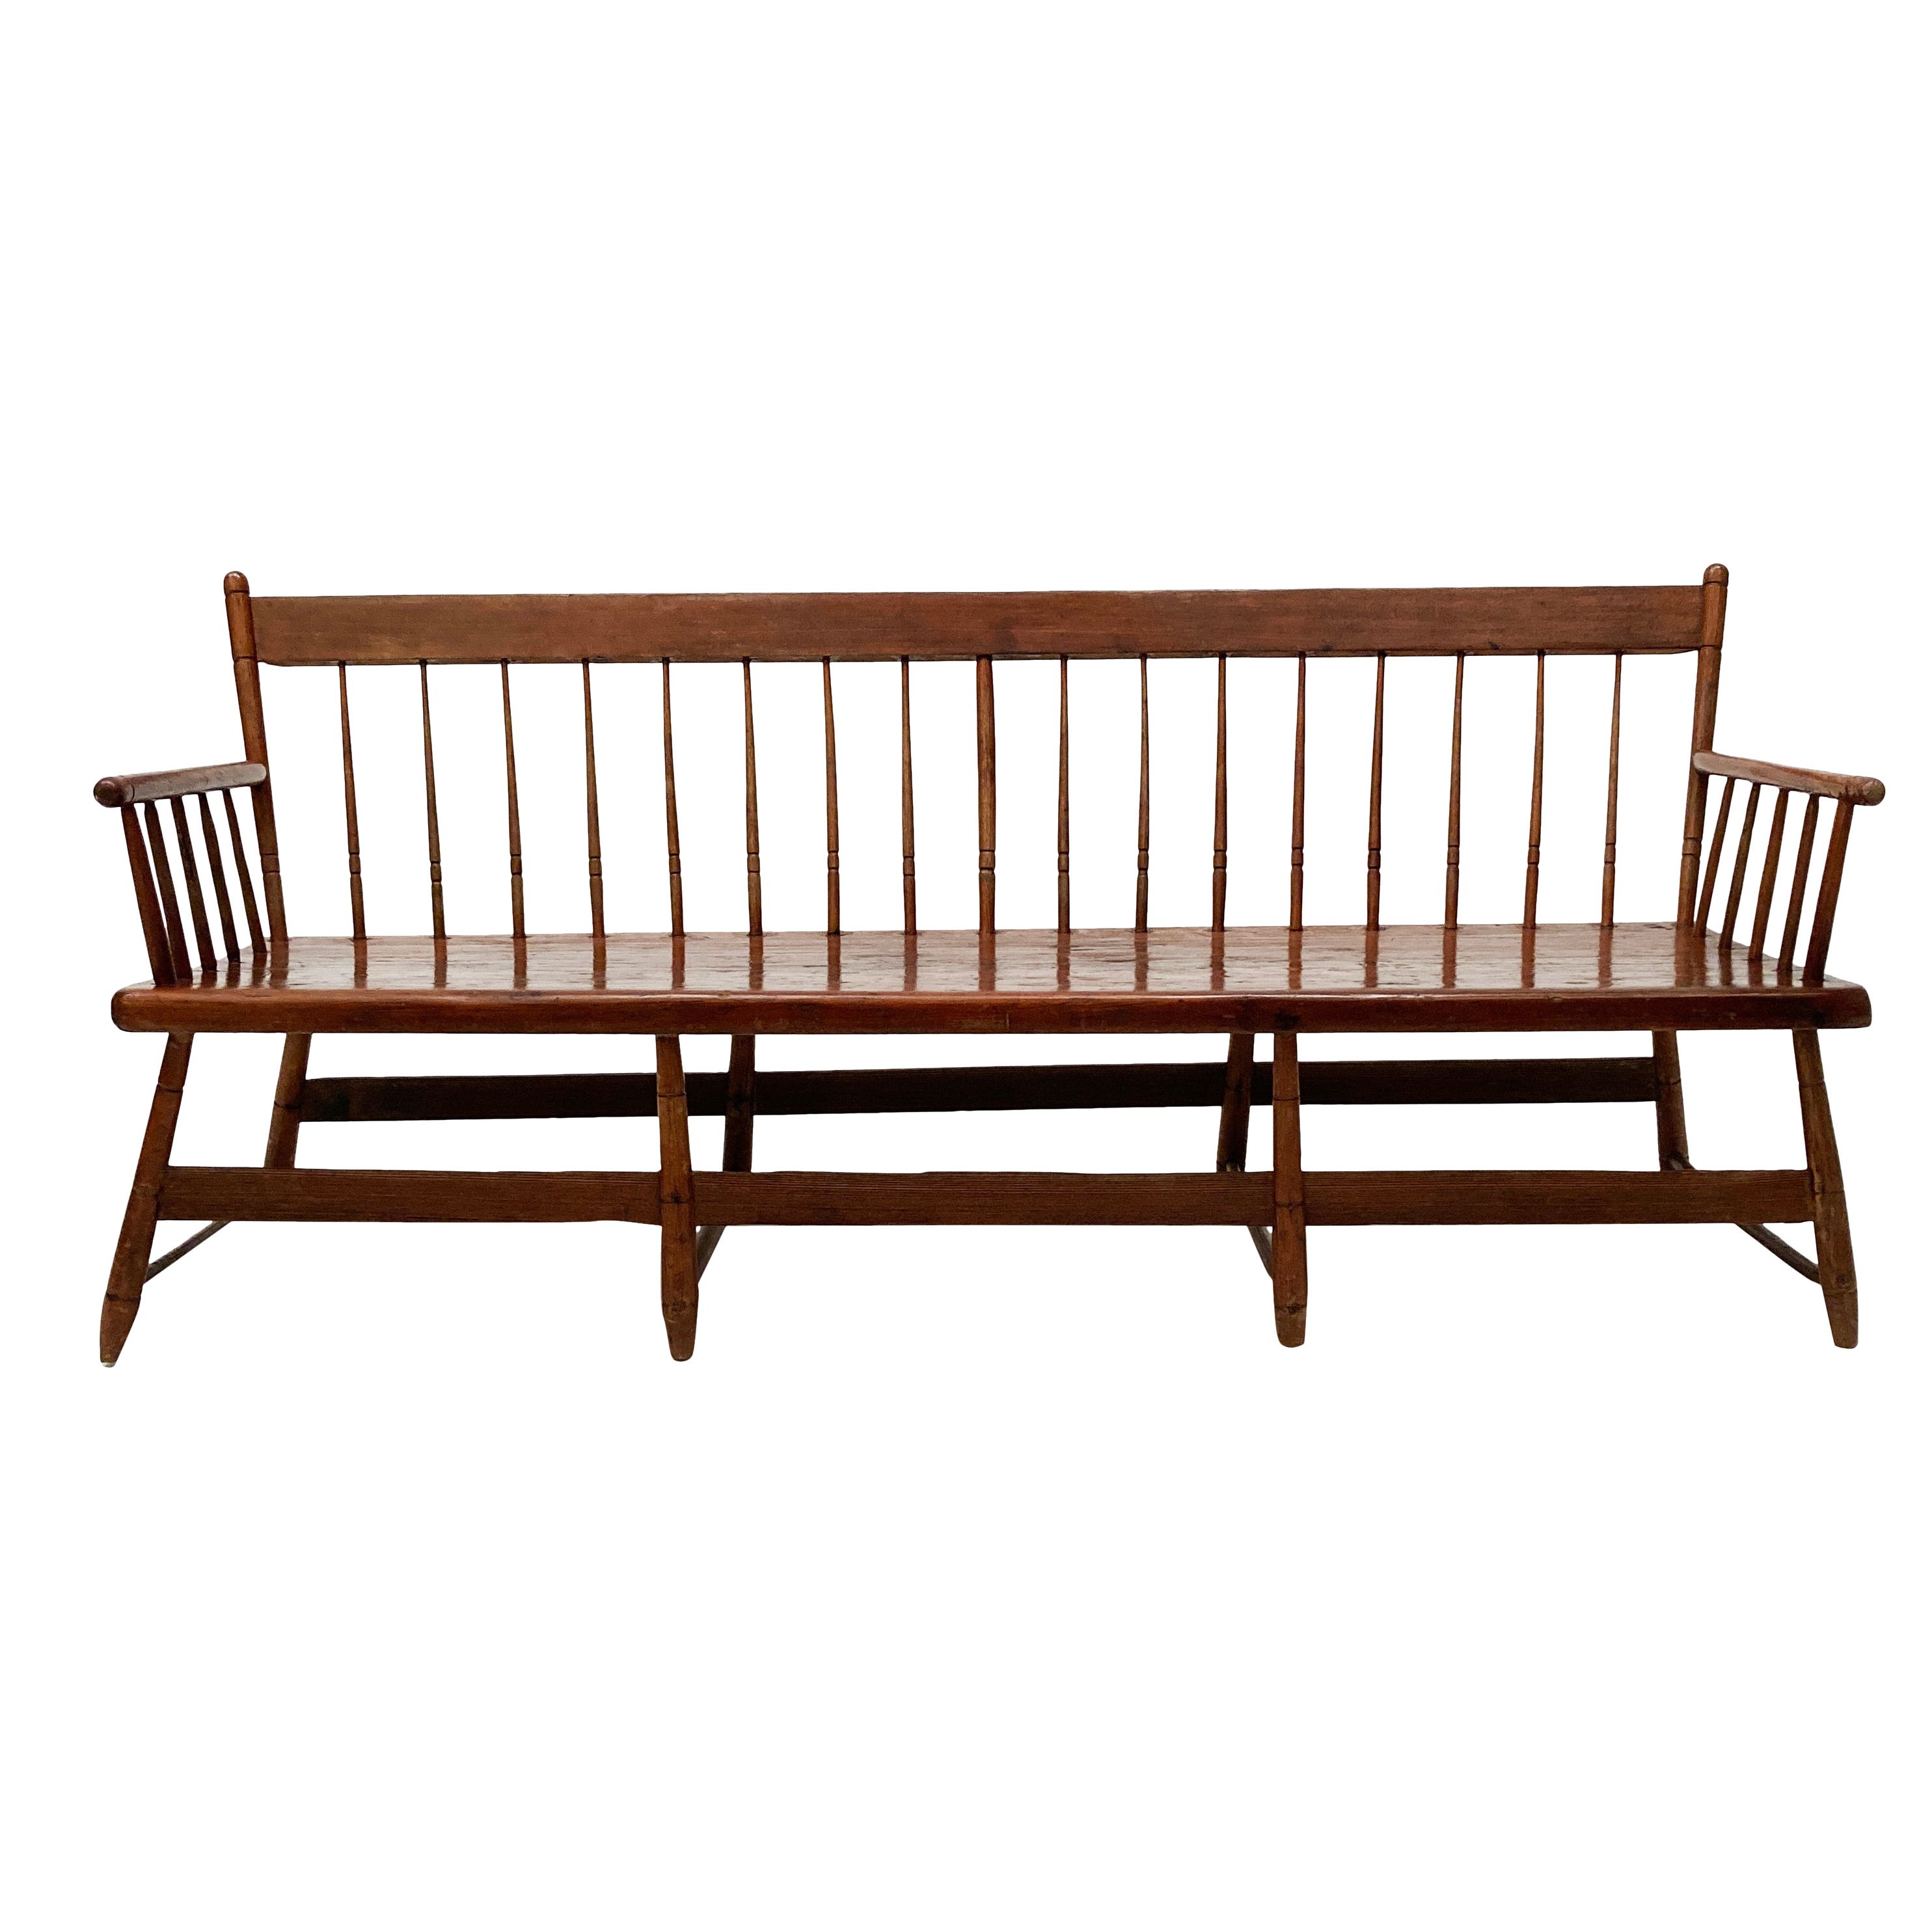 Early 19th Century Early American Pine Windsor Spindle-Back Meeting House Bench